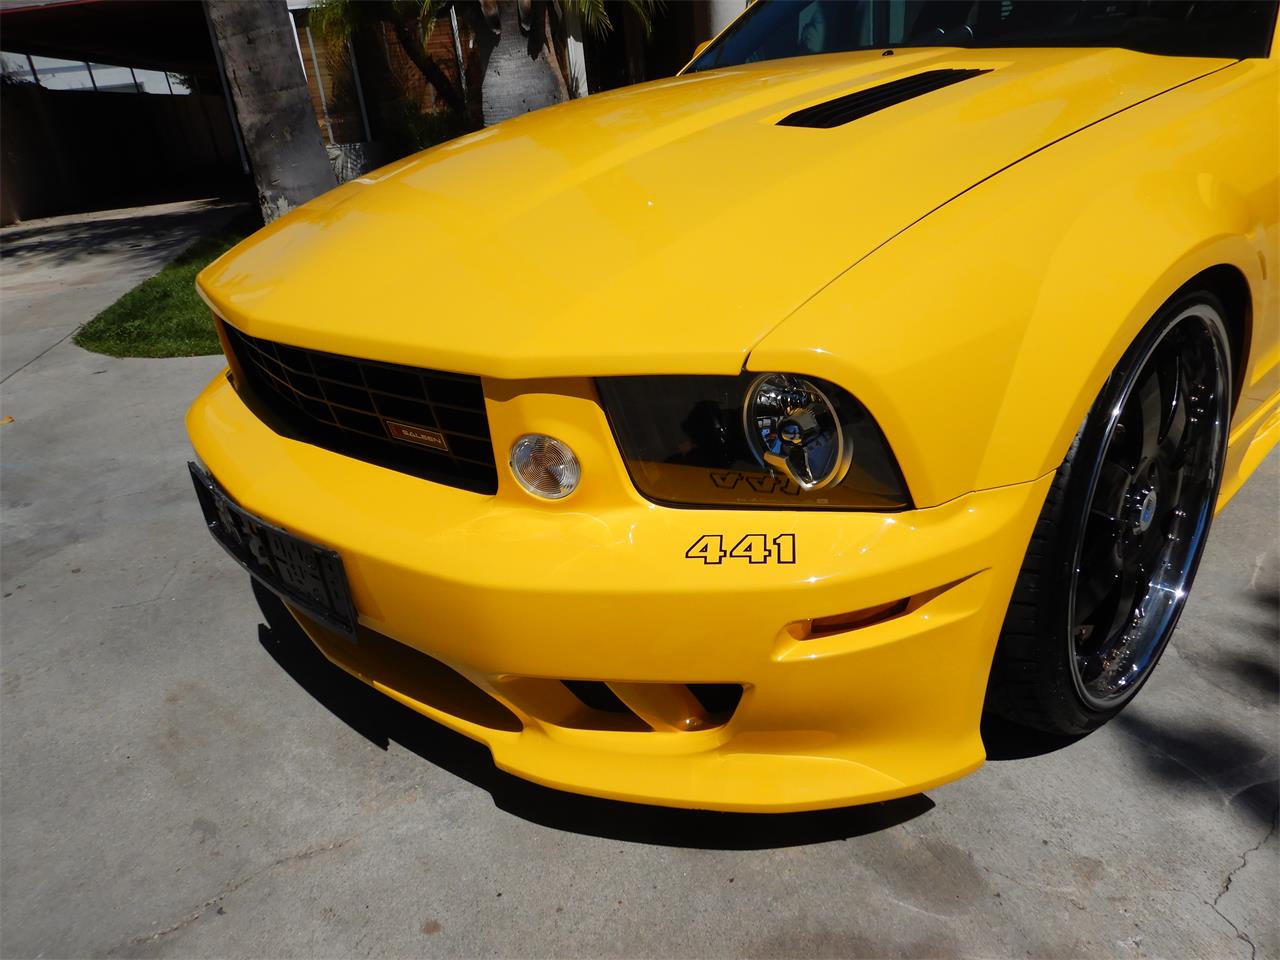 2006 Ford Mustang (Saleen) for sale in Woodland Hills, CA – photo 19